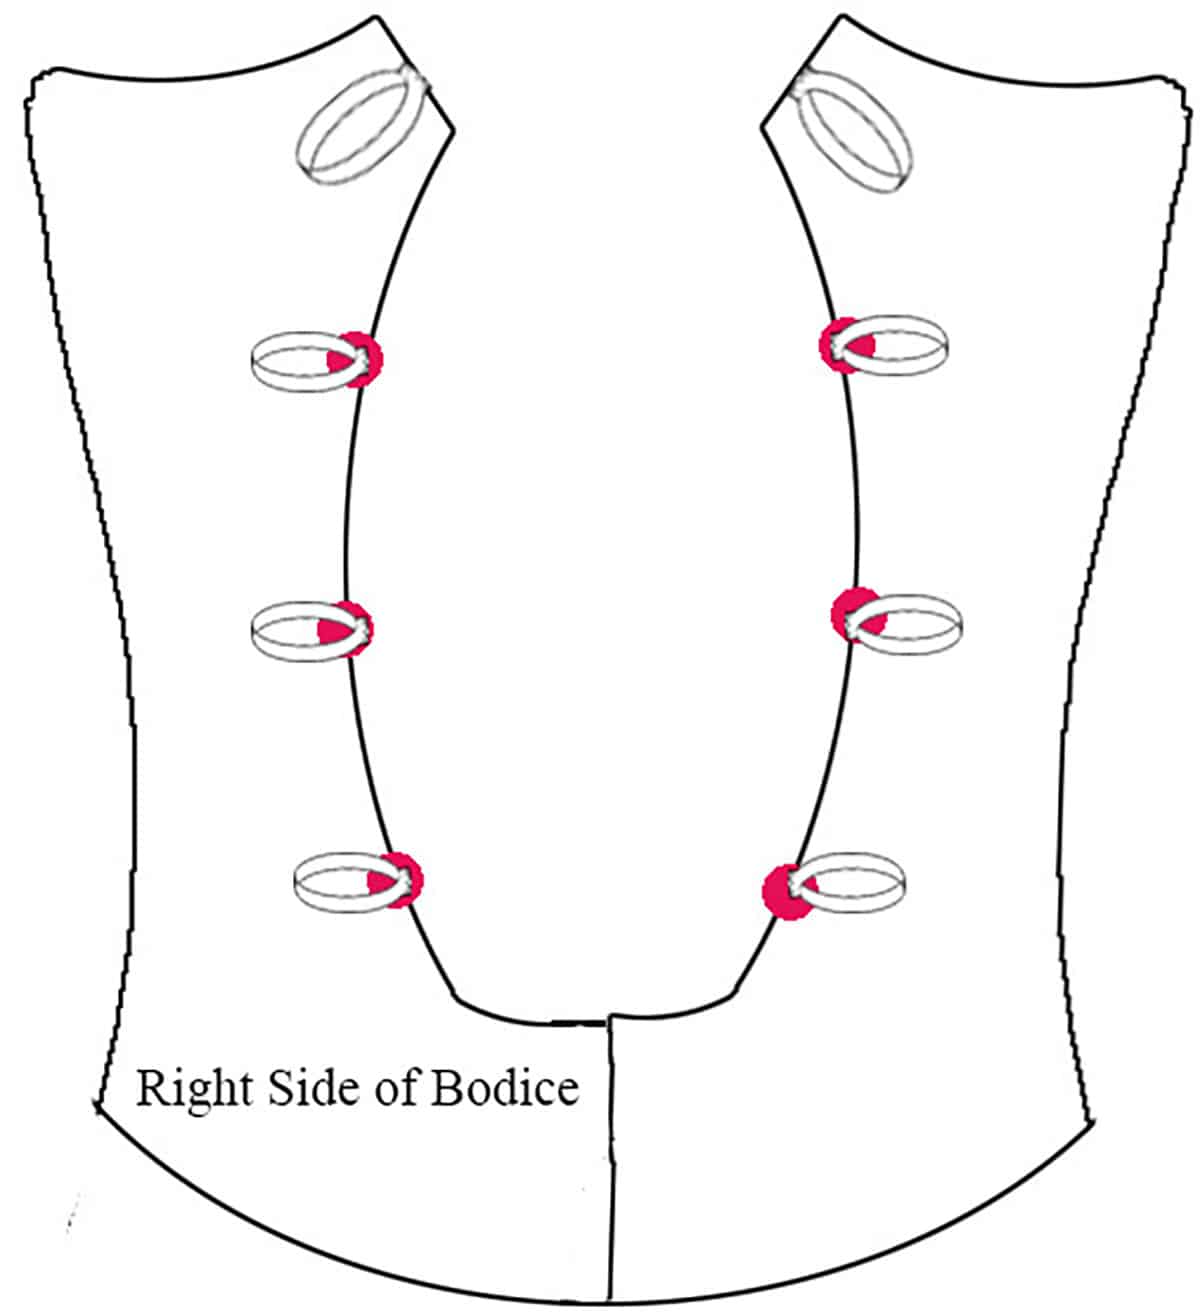 A diagram of a lack up back skating dress, with loops placed on spots marked with red dots.